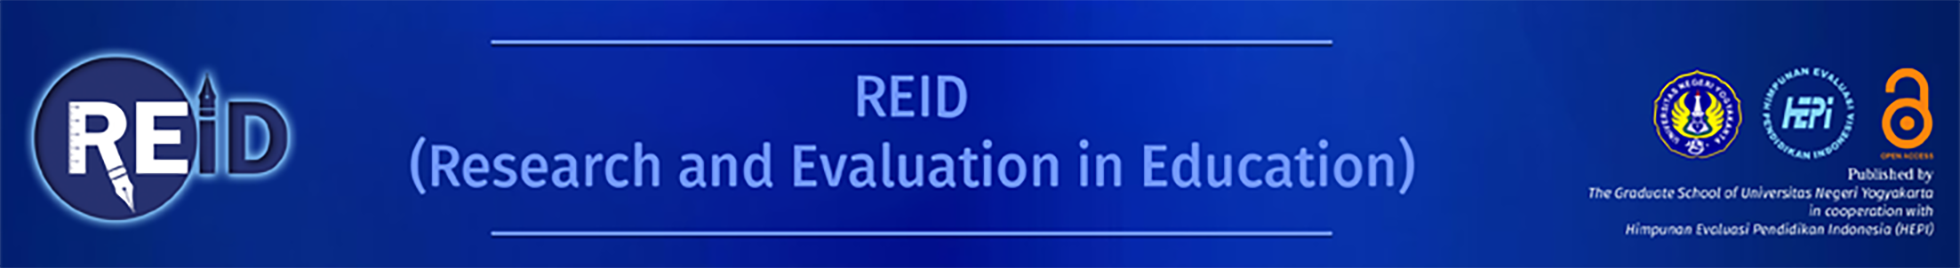 REID (Research and Evaluation in Education)